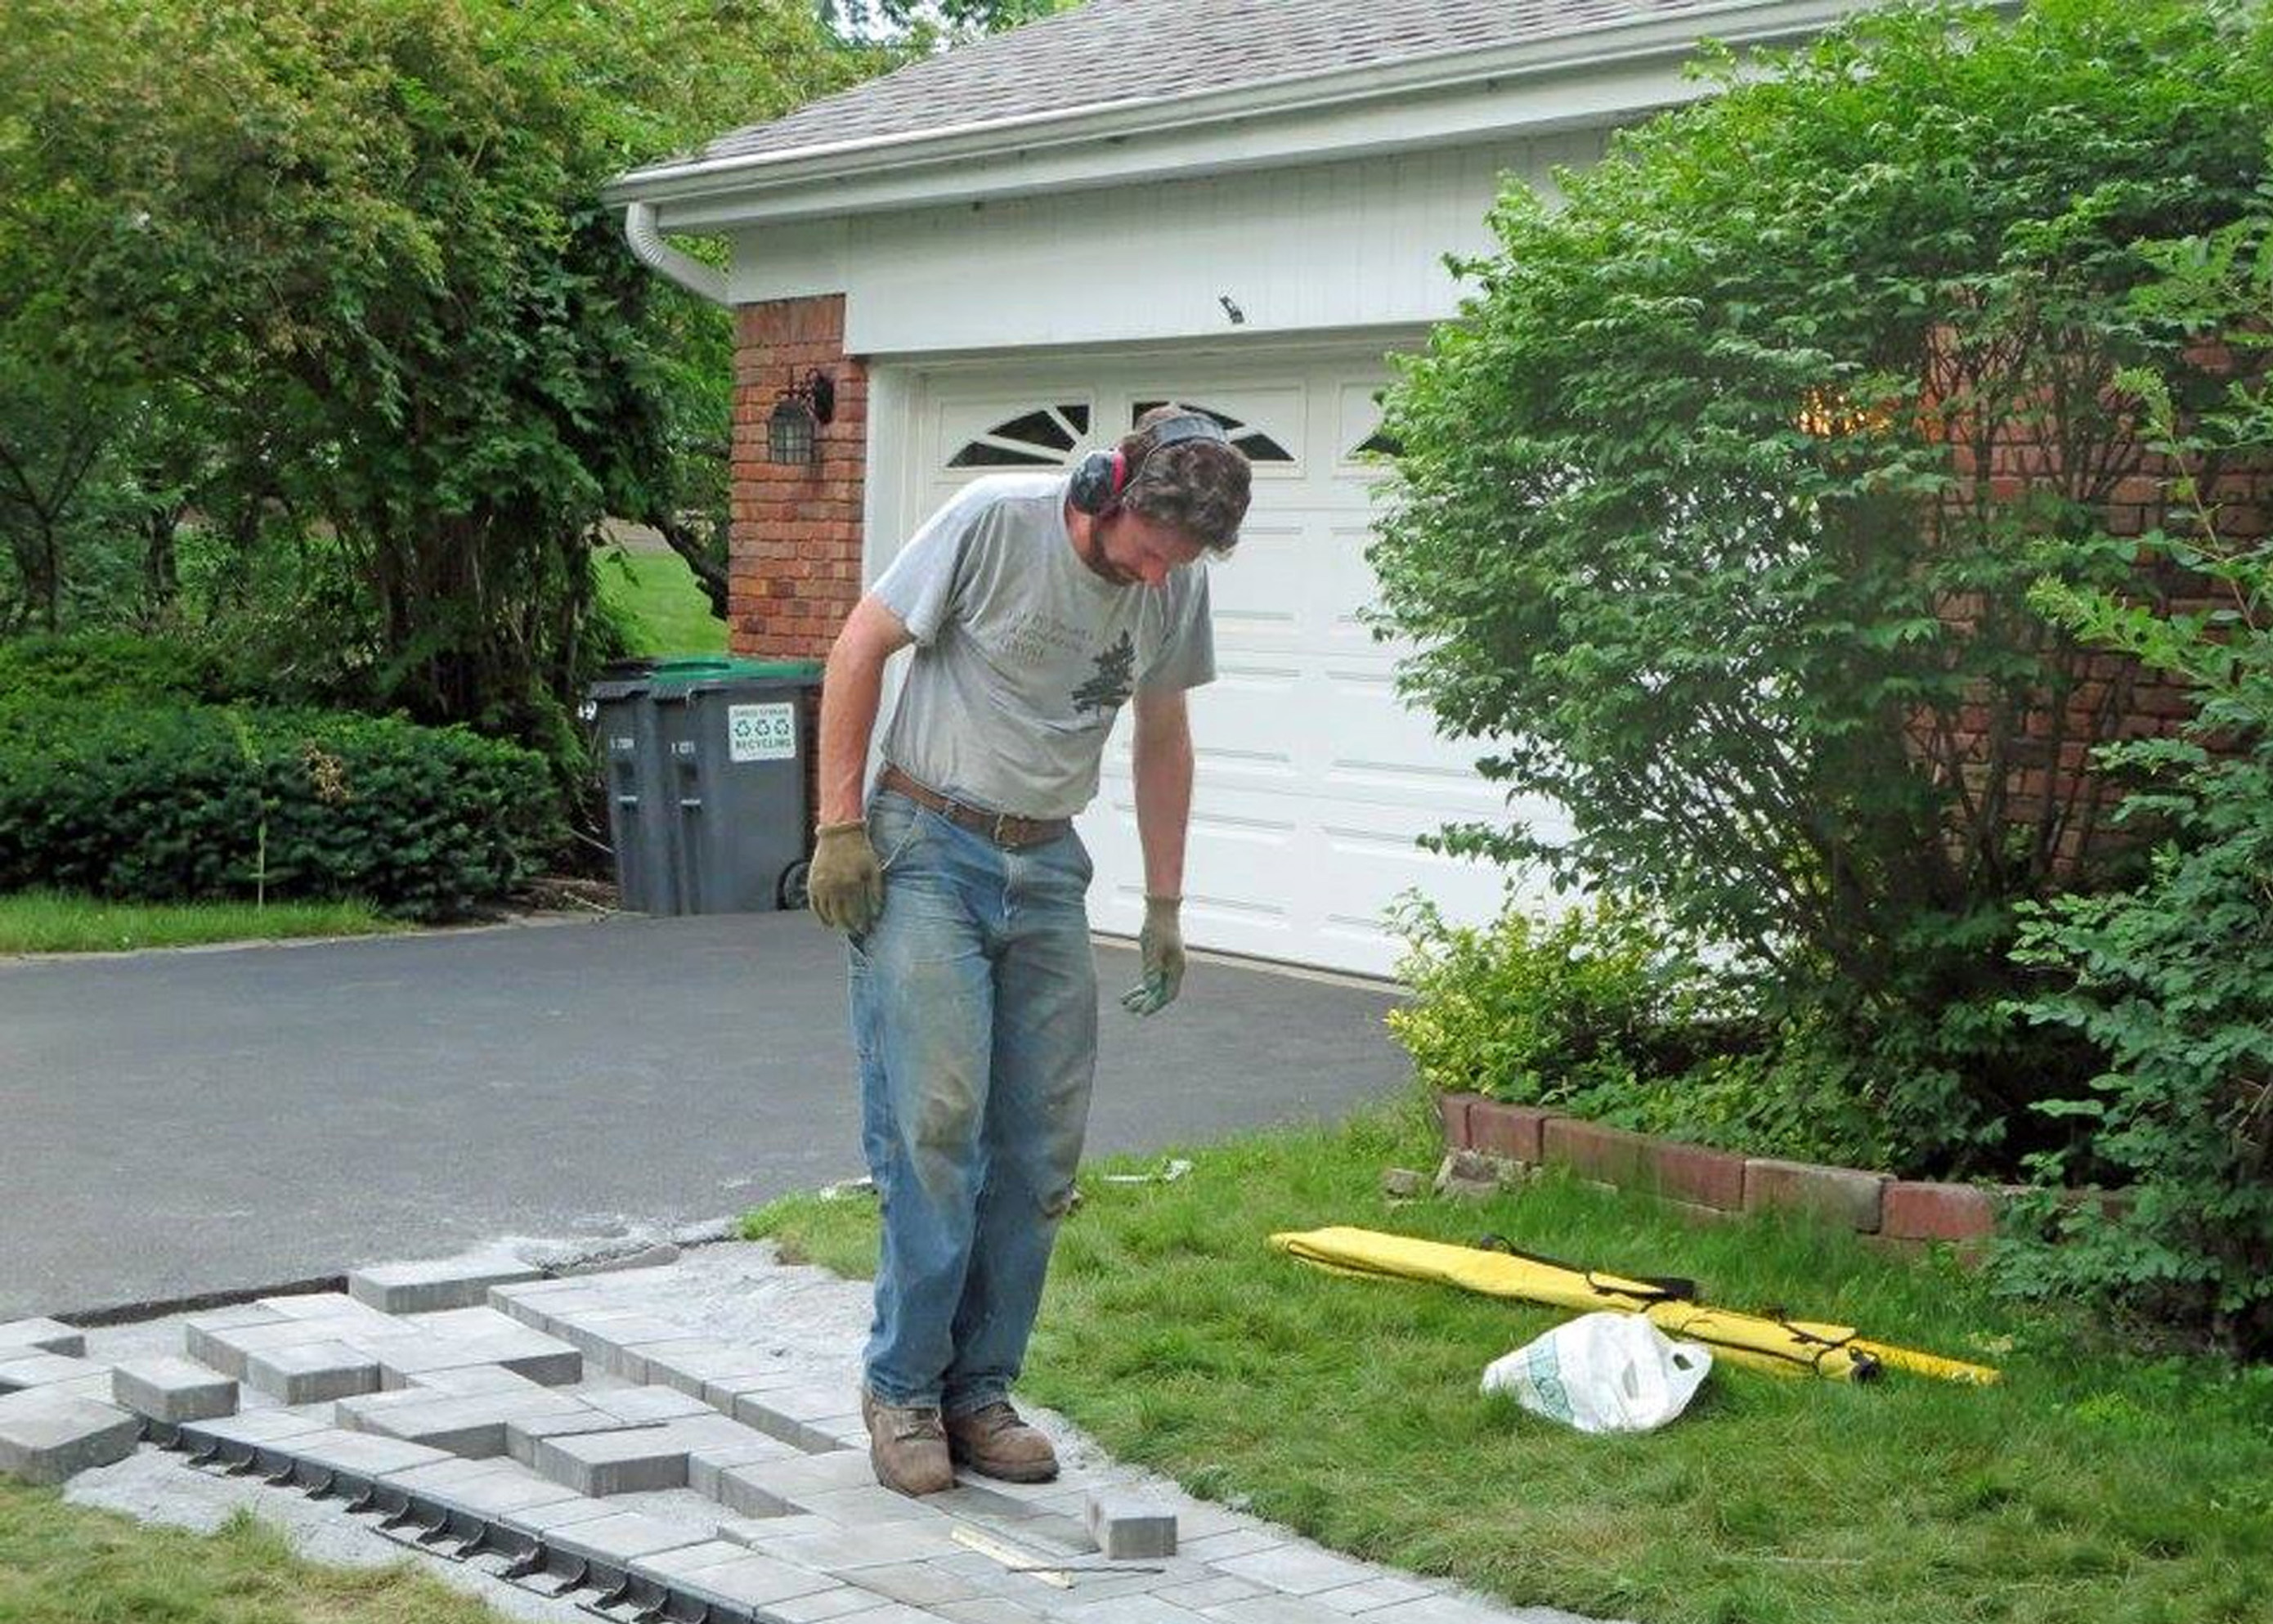 Thumbnail of installation of stone sidewalk in front of house